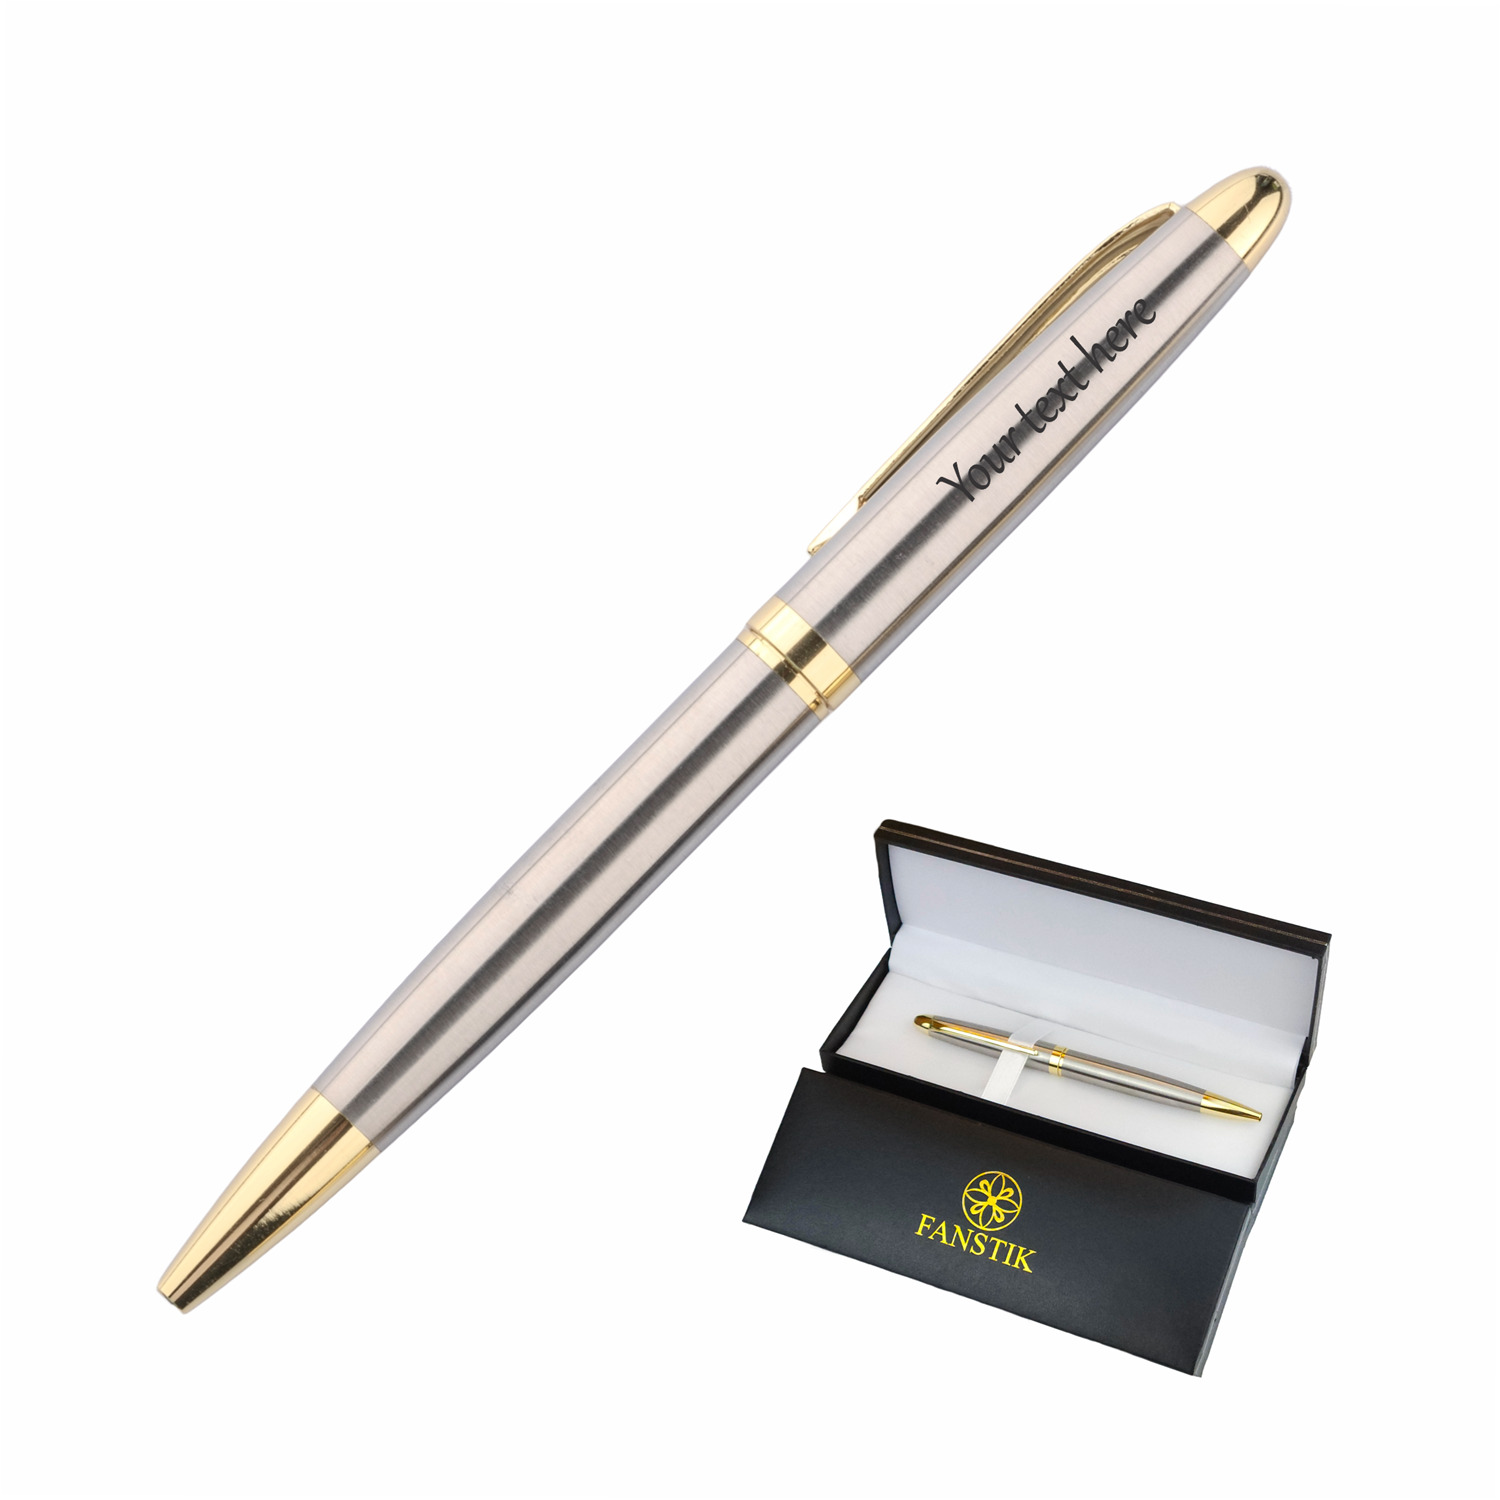 Personalized Pen, Elegant Engraved Pen. Luxury Customized Silver and Gold Pen